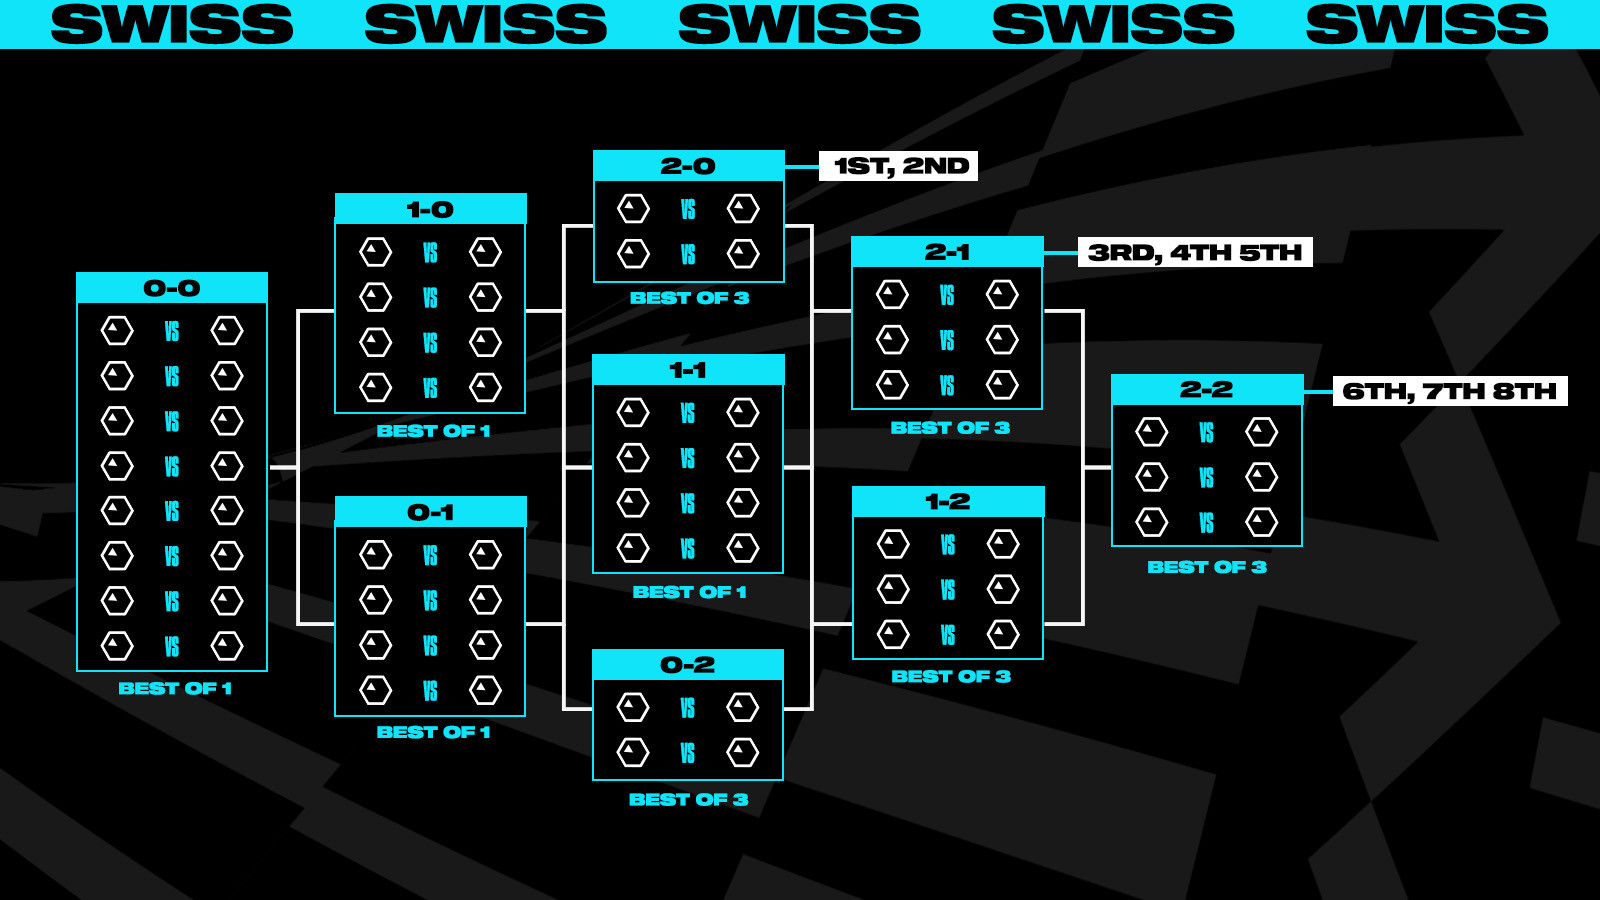 (The Swiss Stage, System of the Worlds 2023 Bron: Riot Games)